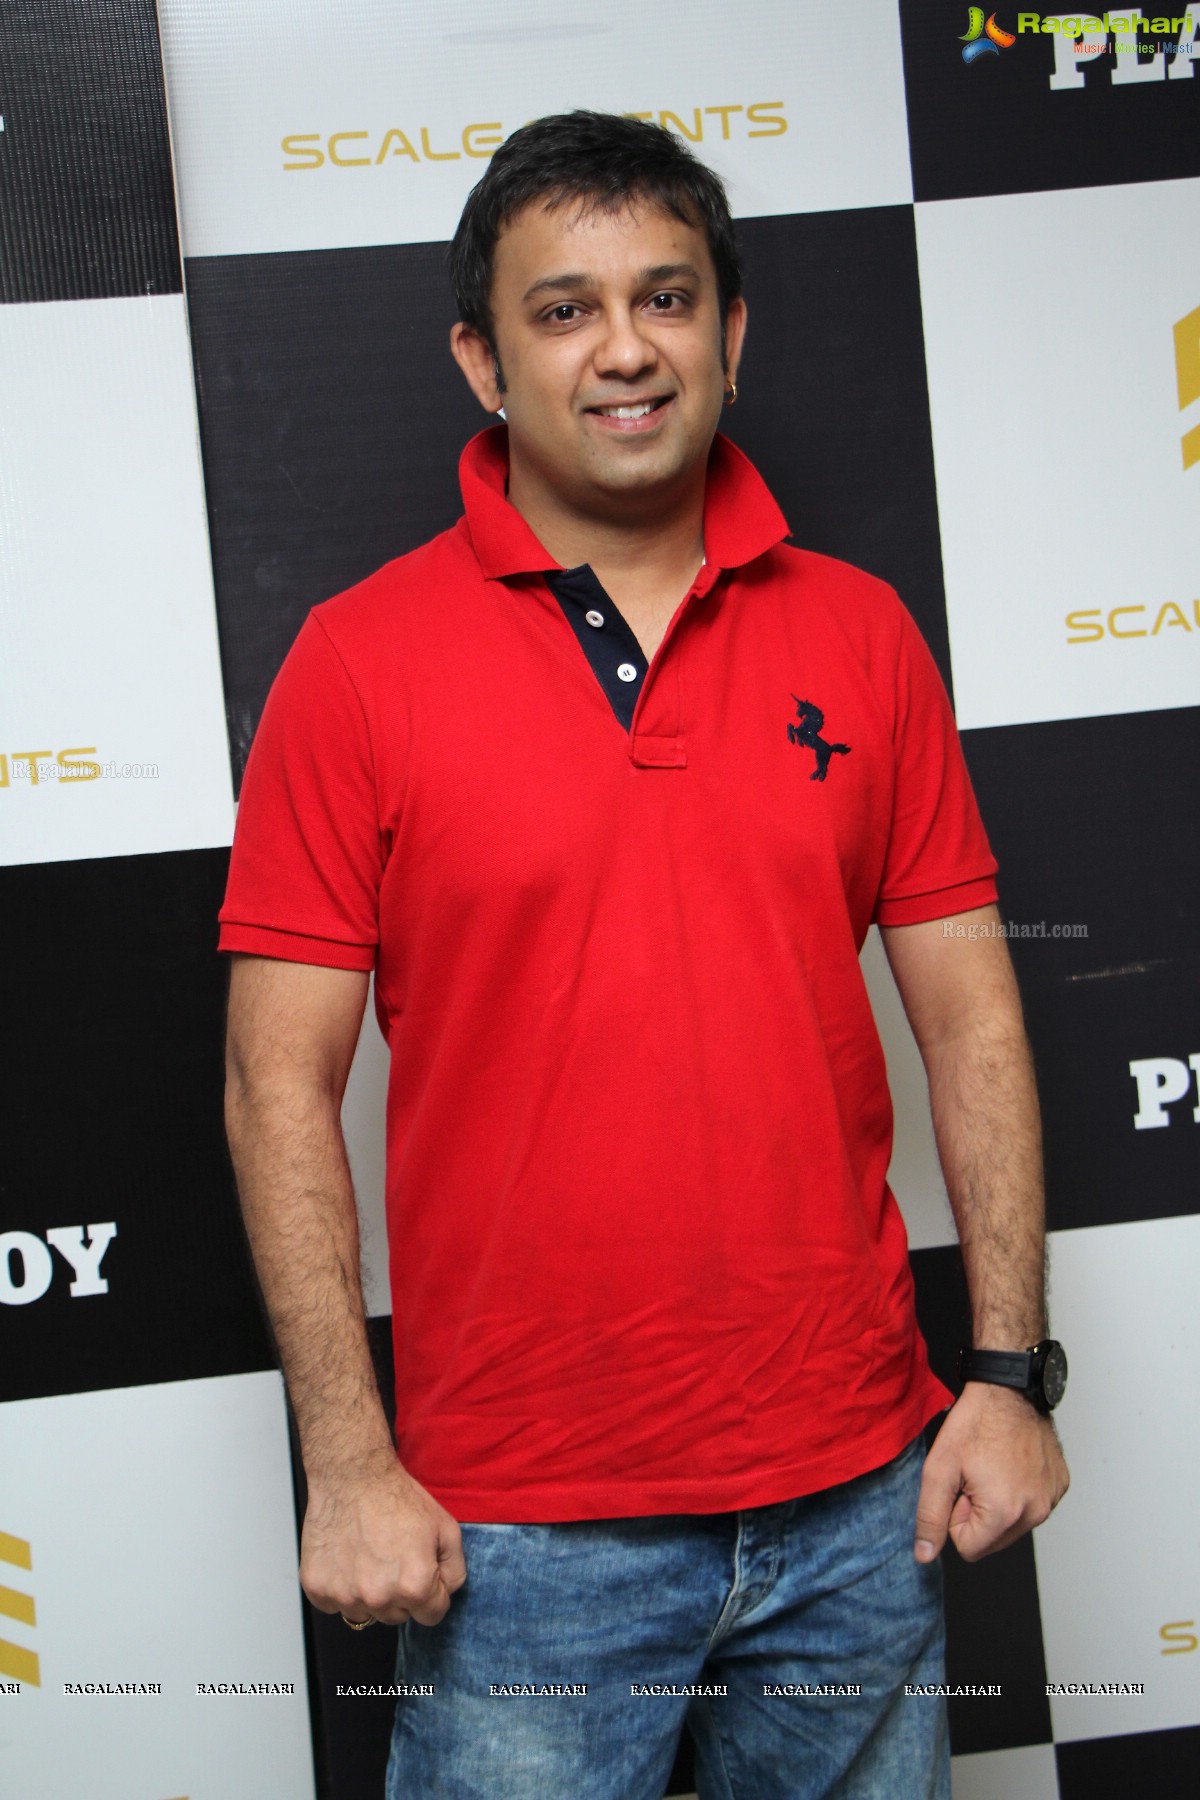 Thursday Night with DJ Piyush Bajaj at Playboy Club - Event by Scale Events